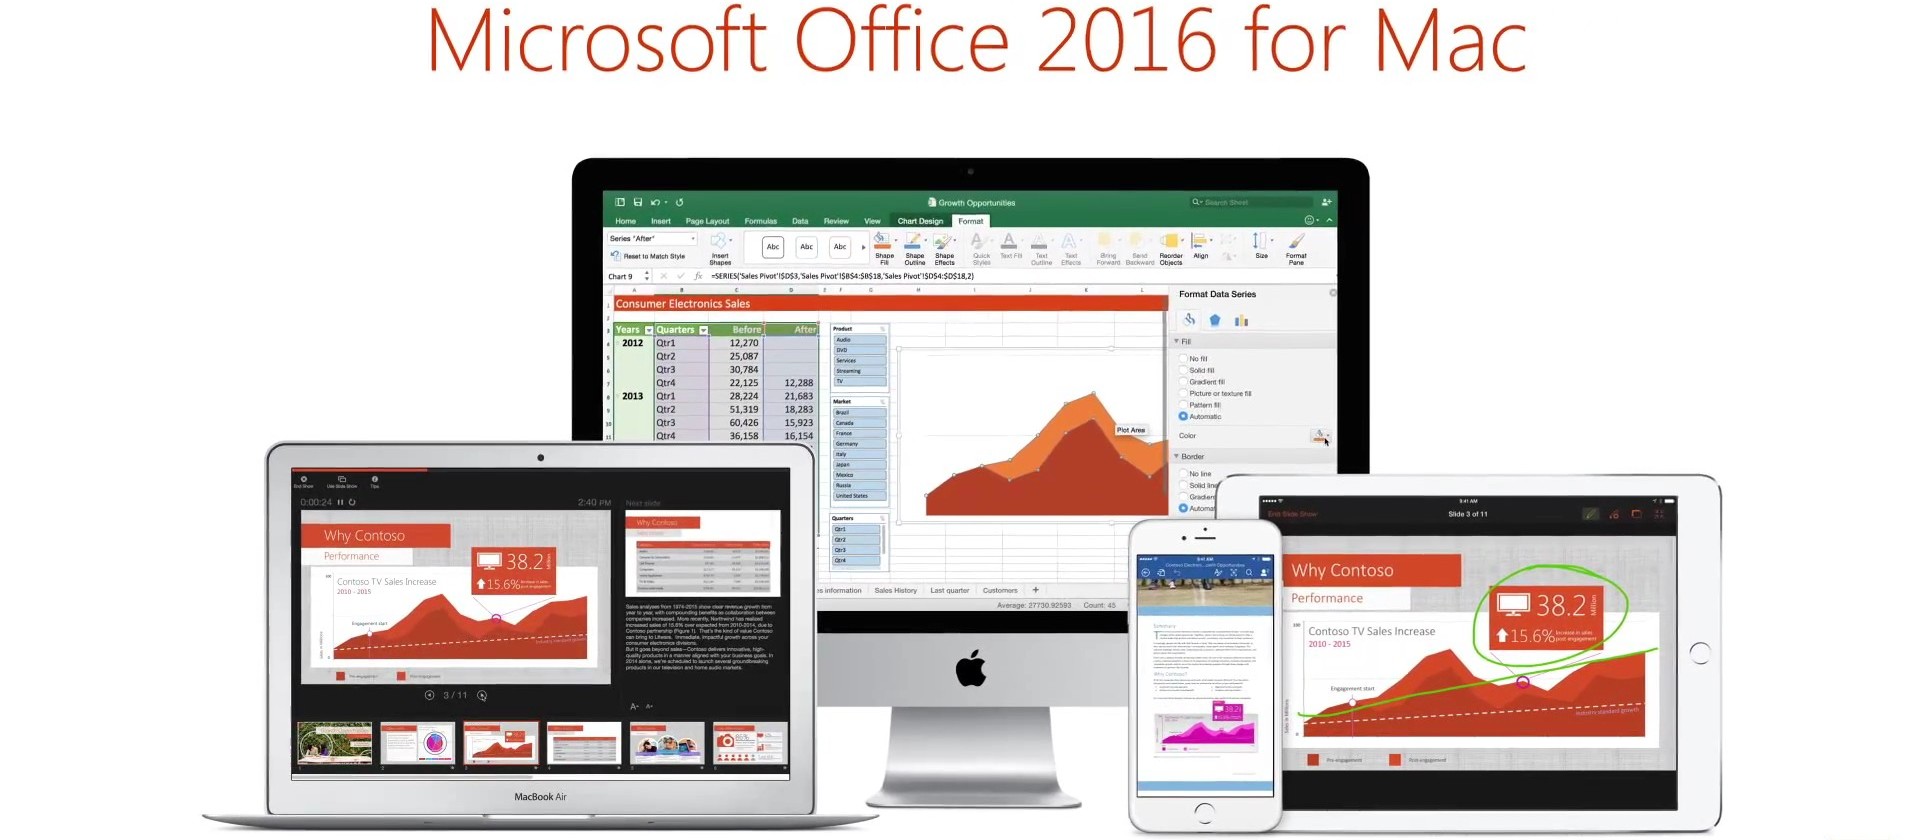 can office for mac 2016 be used on an ipad?